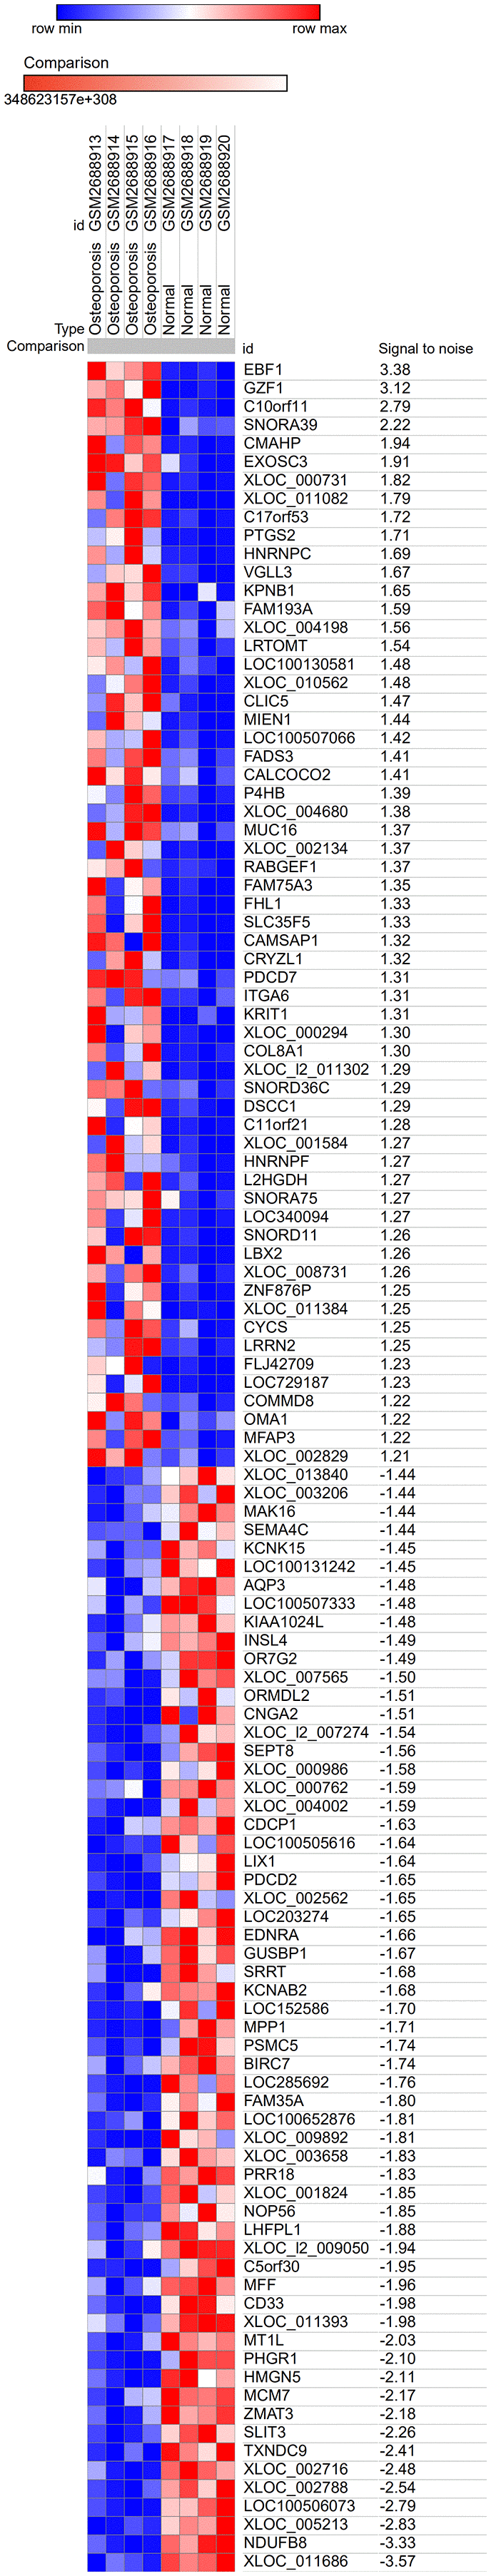 Heat map of the top 60 DEGs in GSE100609 (30 upregulated and 30 downregulated). The GSE100609 dataset, which included gene expression profiles from four healthy individuals and four osteoporotic patients, was obtained from the GEO database. In total, 228 upregulated and 281 downregulated DEGs were identified. Red, upregulation; blue, downregulation.